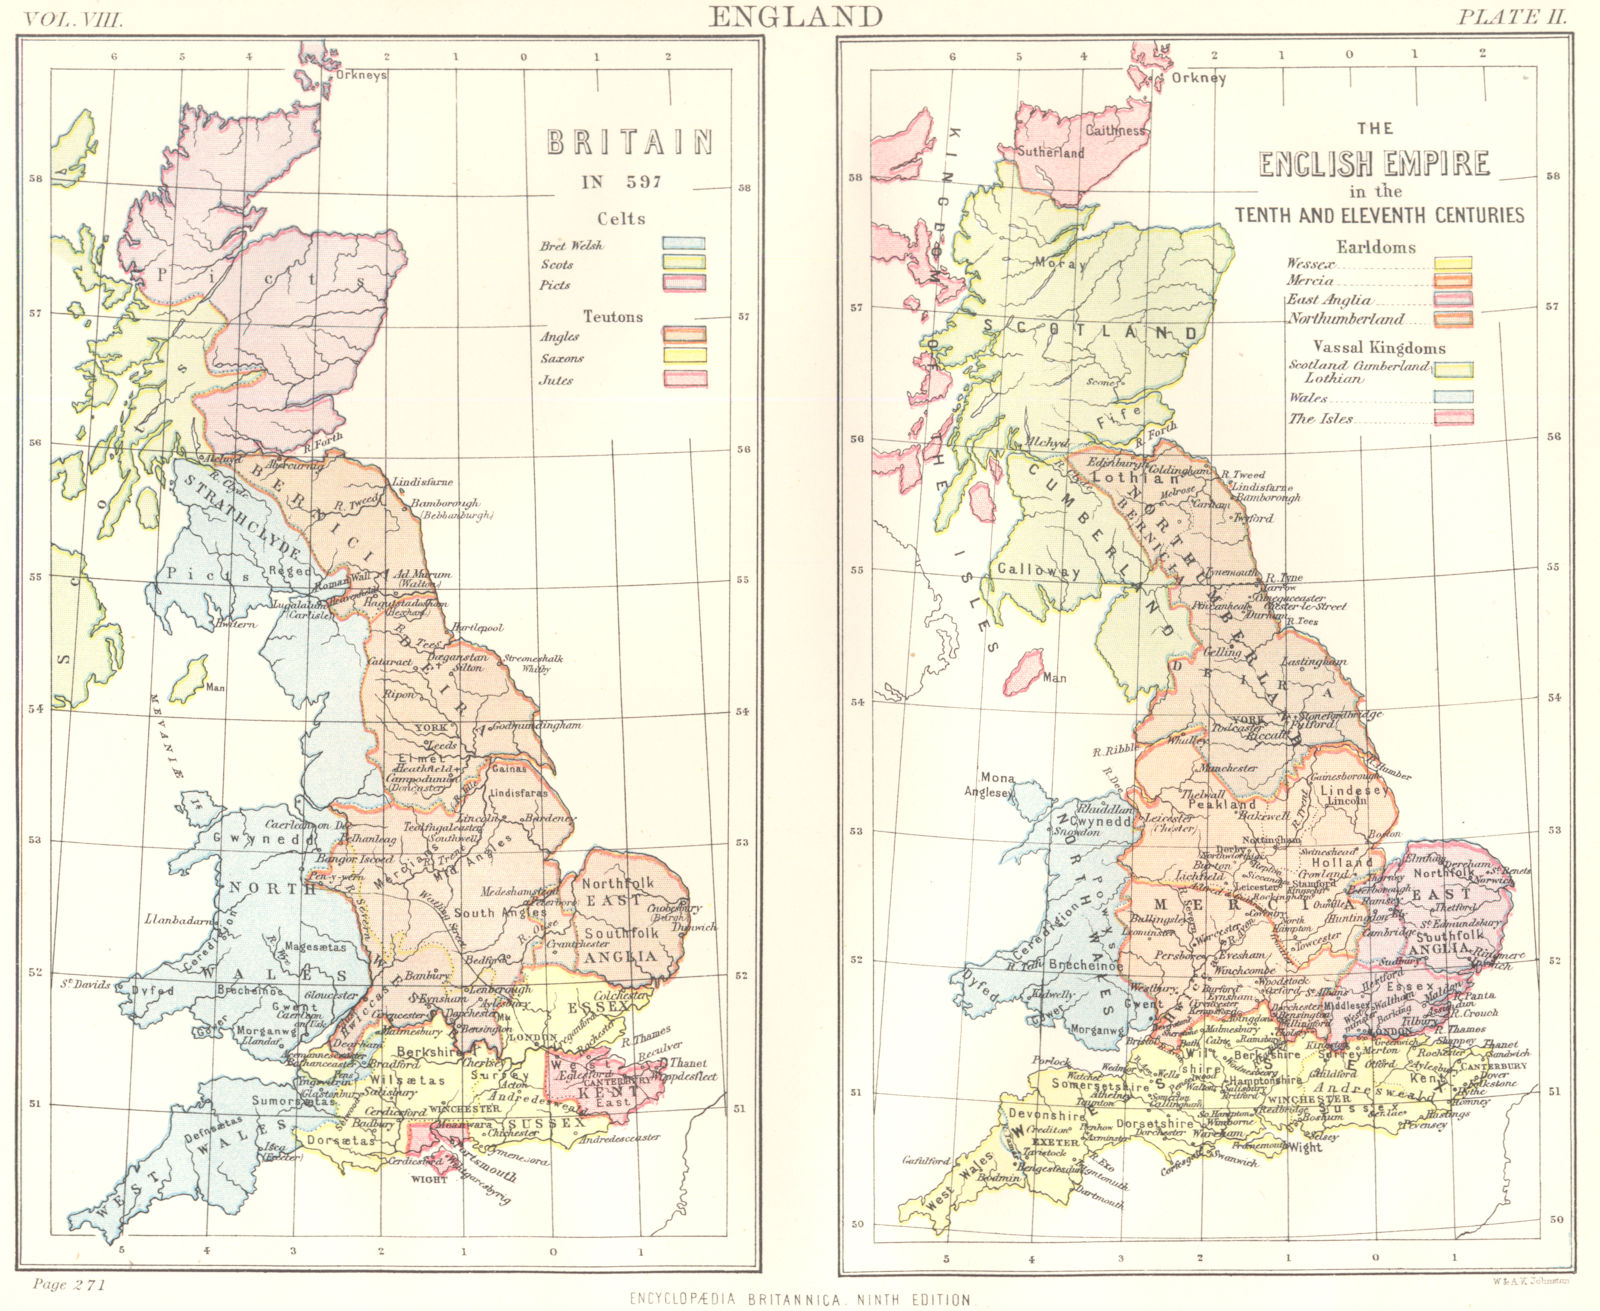 Associate Product GREAT BRITAIN. in 597 tribes Celts Teutons.English Empire.10-11C earls 1898 map